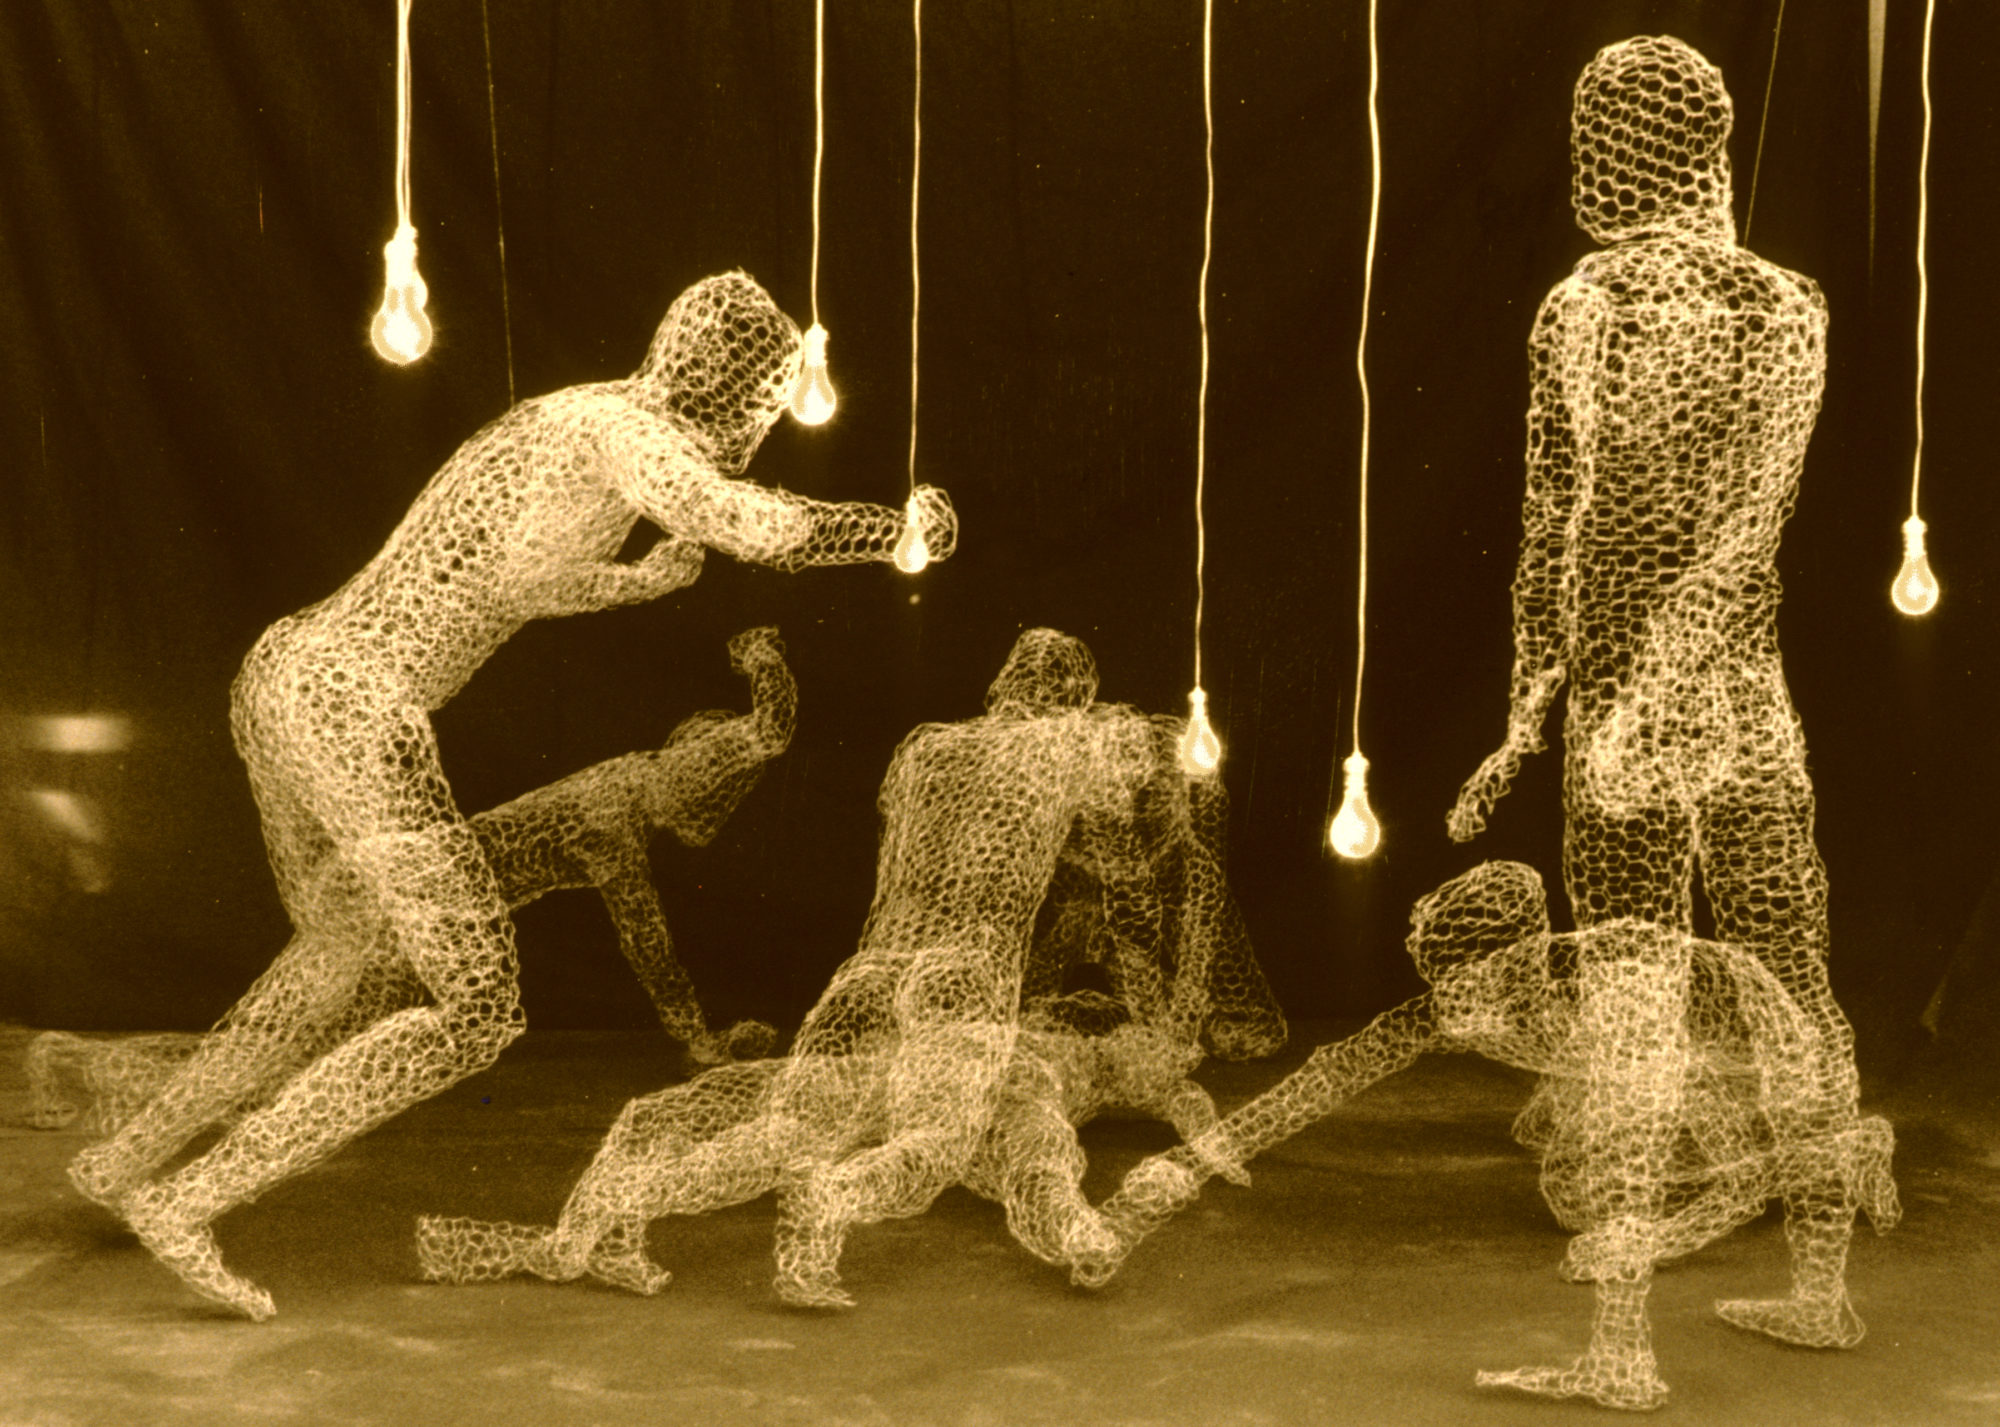 *Content Warning* five male figures, constructed out of metal wire, crowd around a male figure raping a female figure.